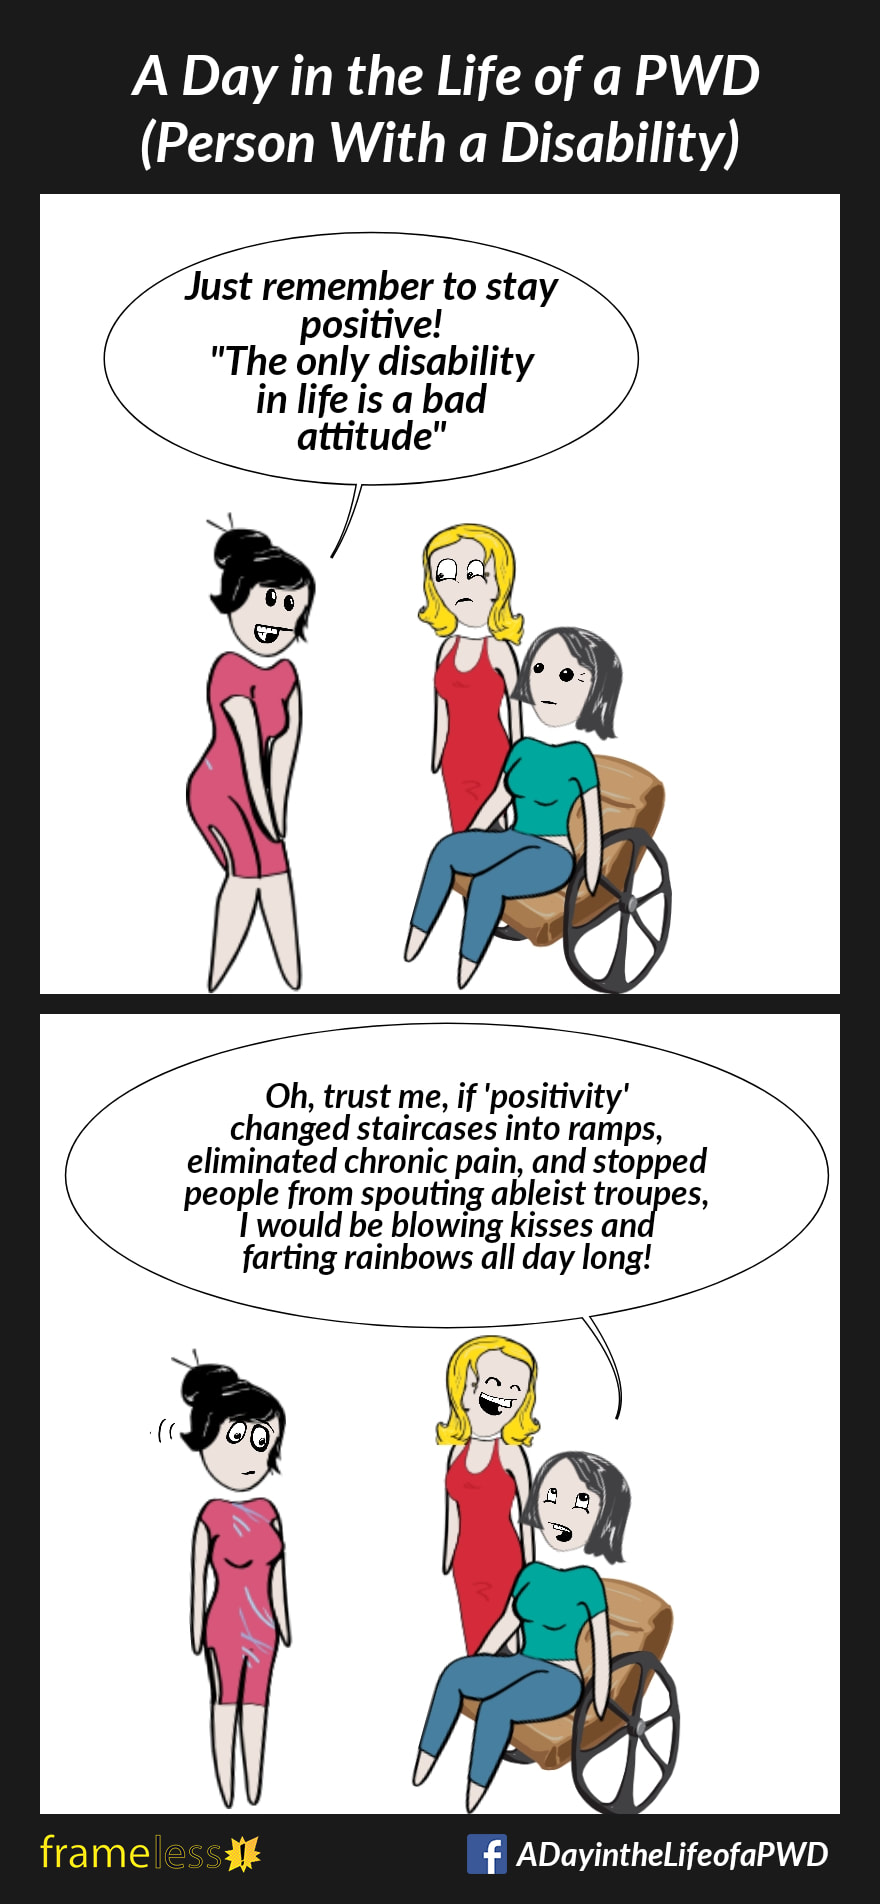 COMIC STRIP 
A Day in the Life of a PWD (Person With a Disability) 

Frame 1:
A woman in a wheelchair and her friend are talking to an acquaintance. 
ACQUAINTANCE: Just remember to stay positive! 